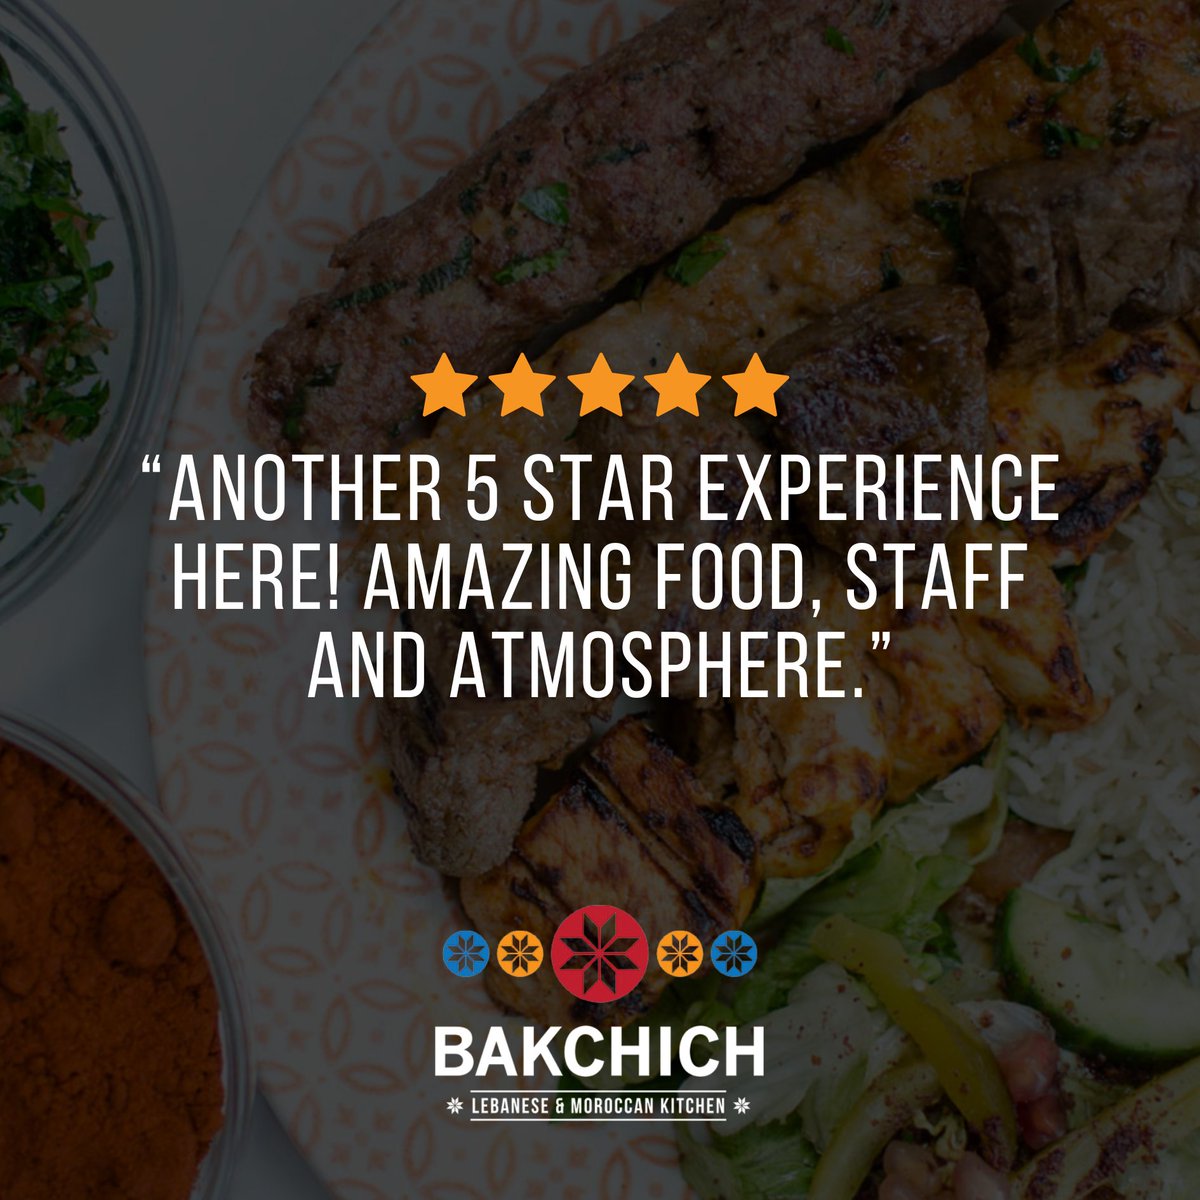 Another excellent review! Thanks to all our lovely customers 🤩
.
.
.
#customerreview #liverpoolfoodie #thankful #Liverpool #liverpoolrestaurant #liverpoolfoodie #foodblogger #foodblog #liverpool #boldstreet